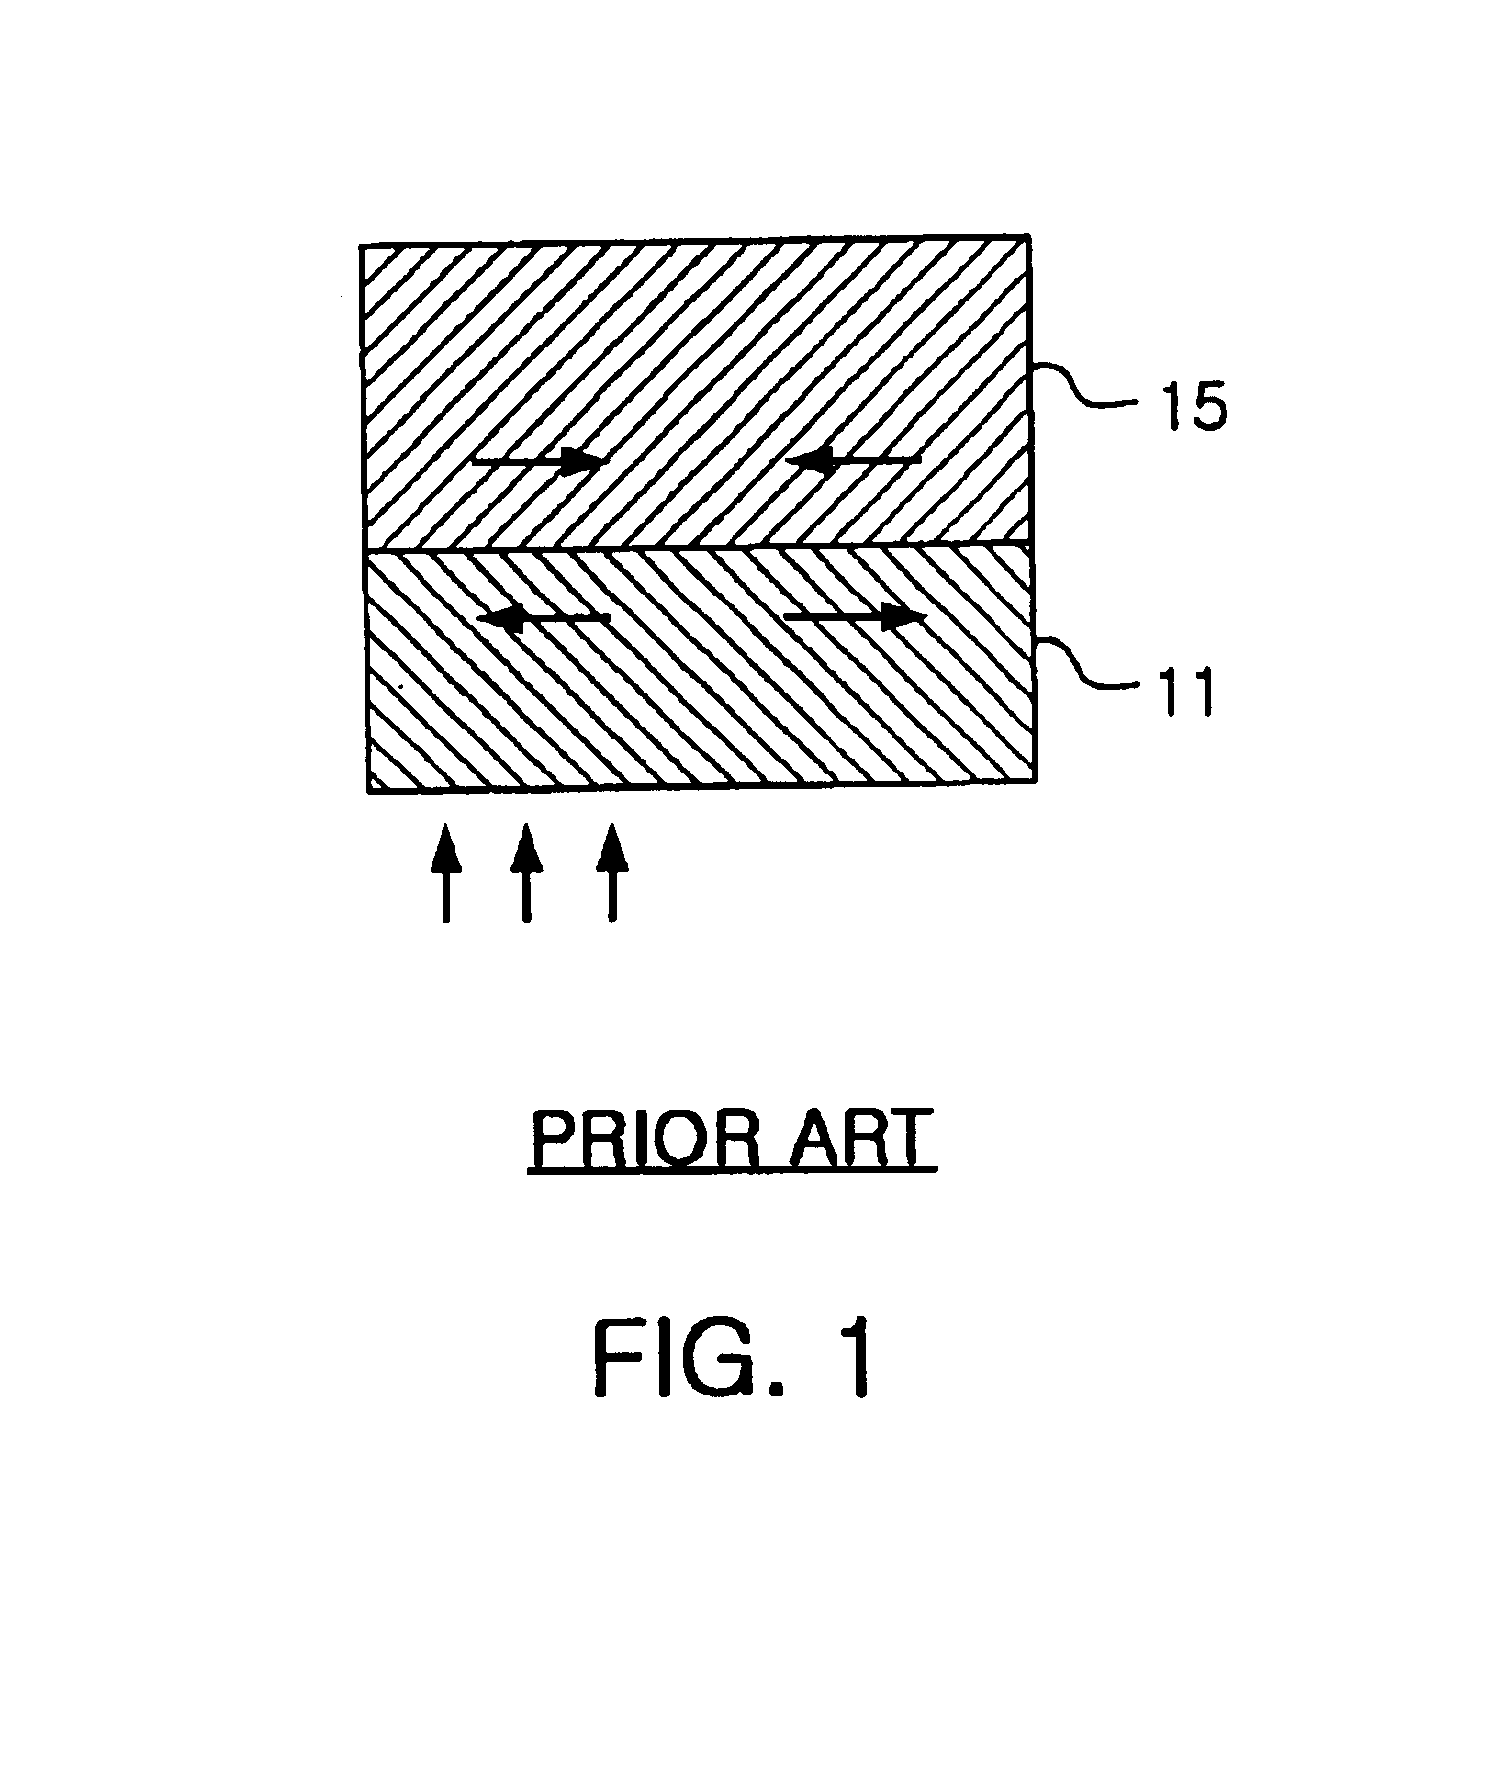 Method for manufacturing gallium nitride (GaN) based single crystalline substrate that include separating from a growth substrate